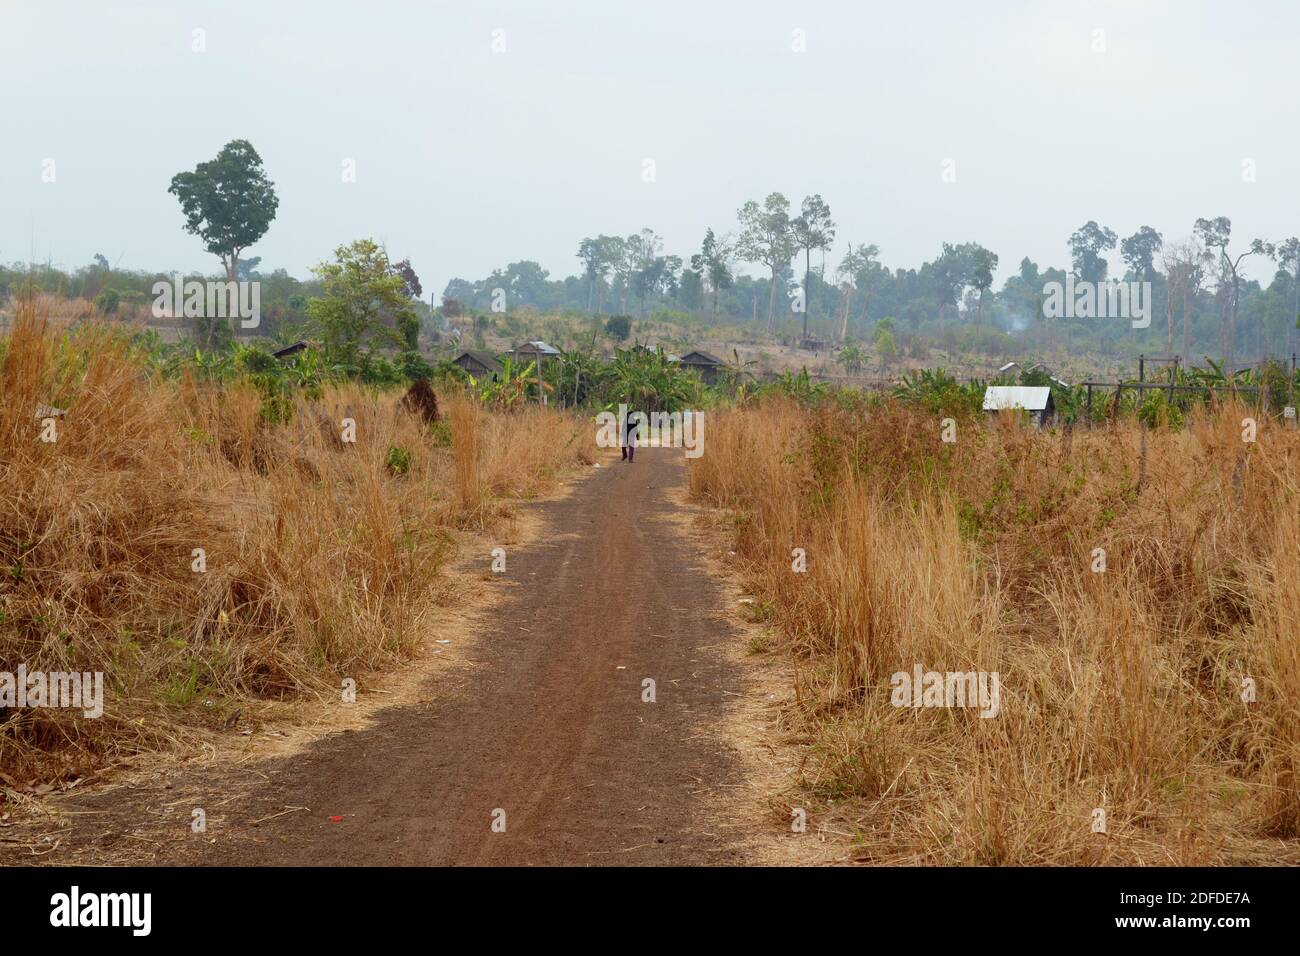 Straight rural road along dry grass fields. Countryside dirt trail through desert landscape. Barren land and arid climate. Cambodia Stock Photo